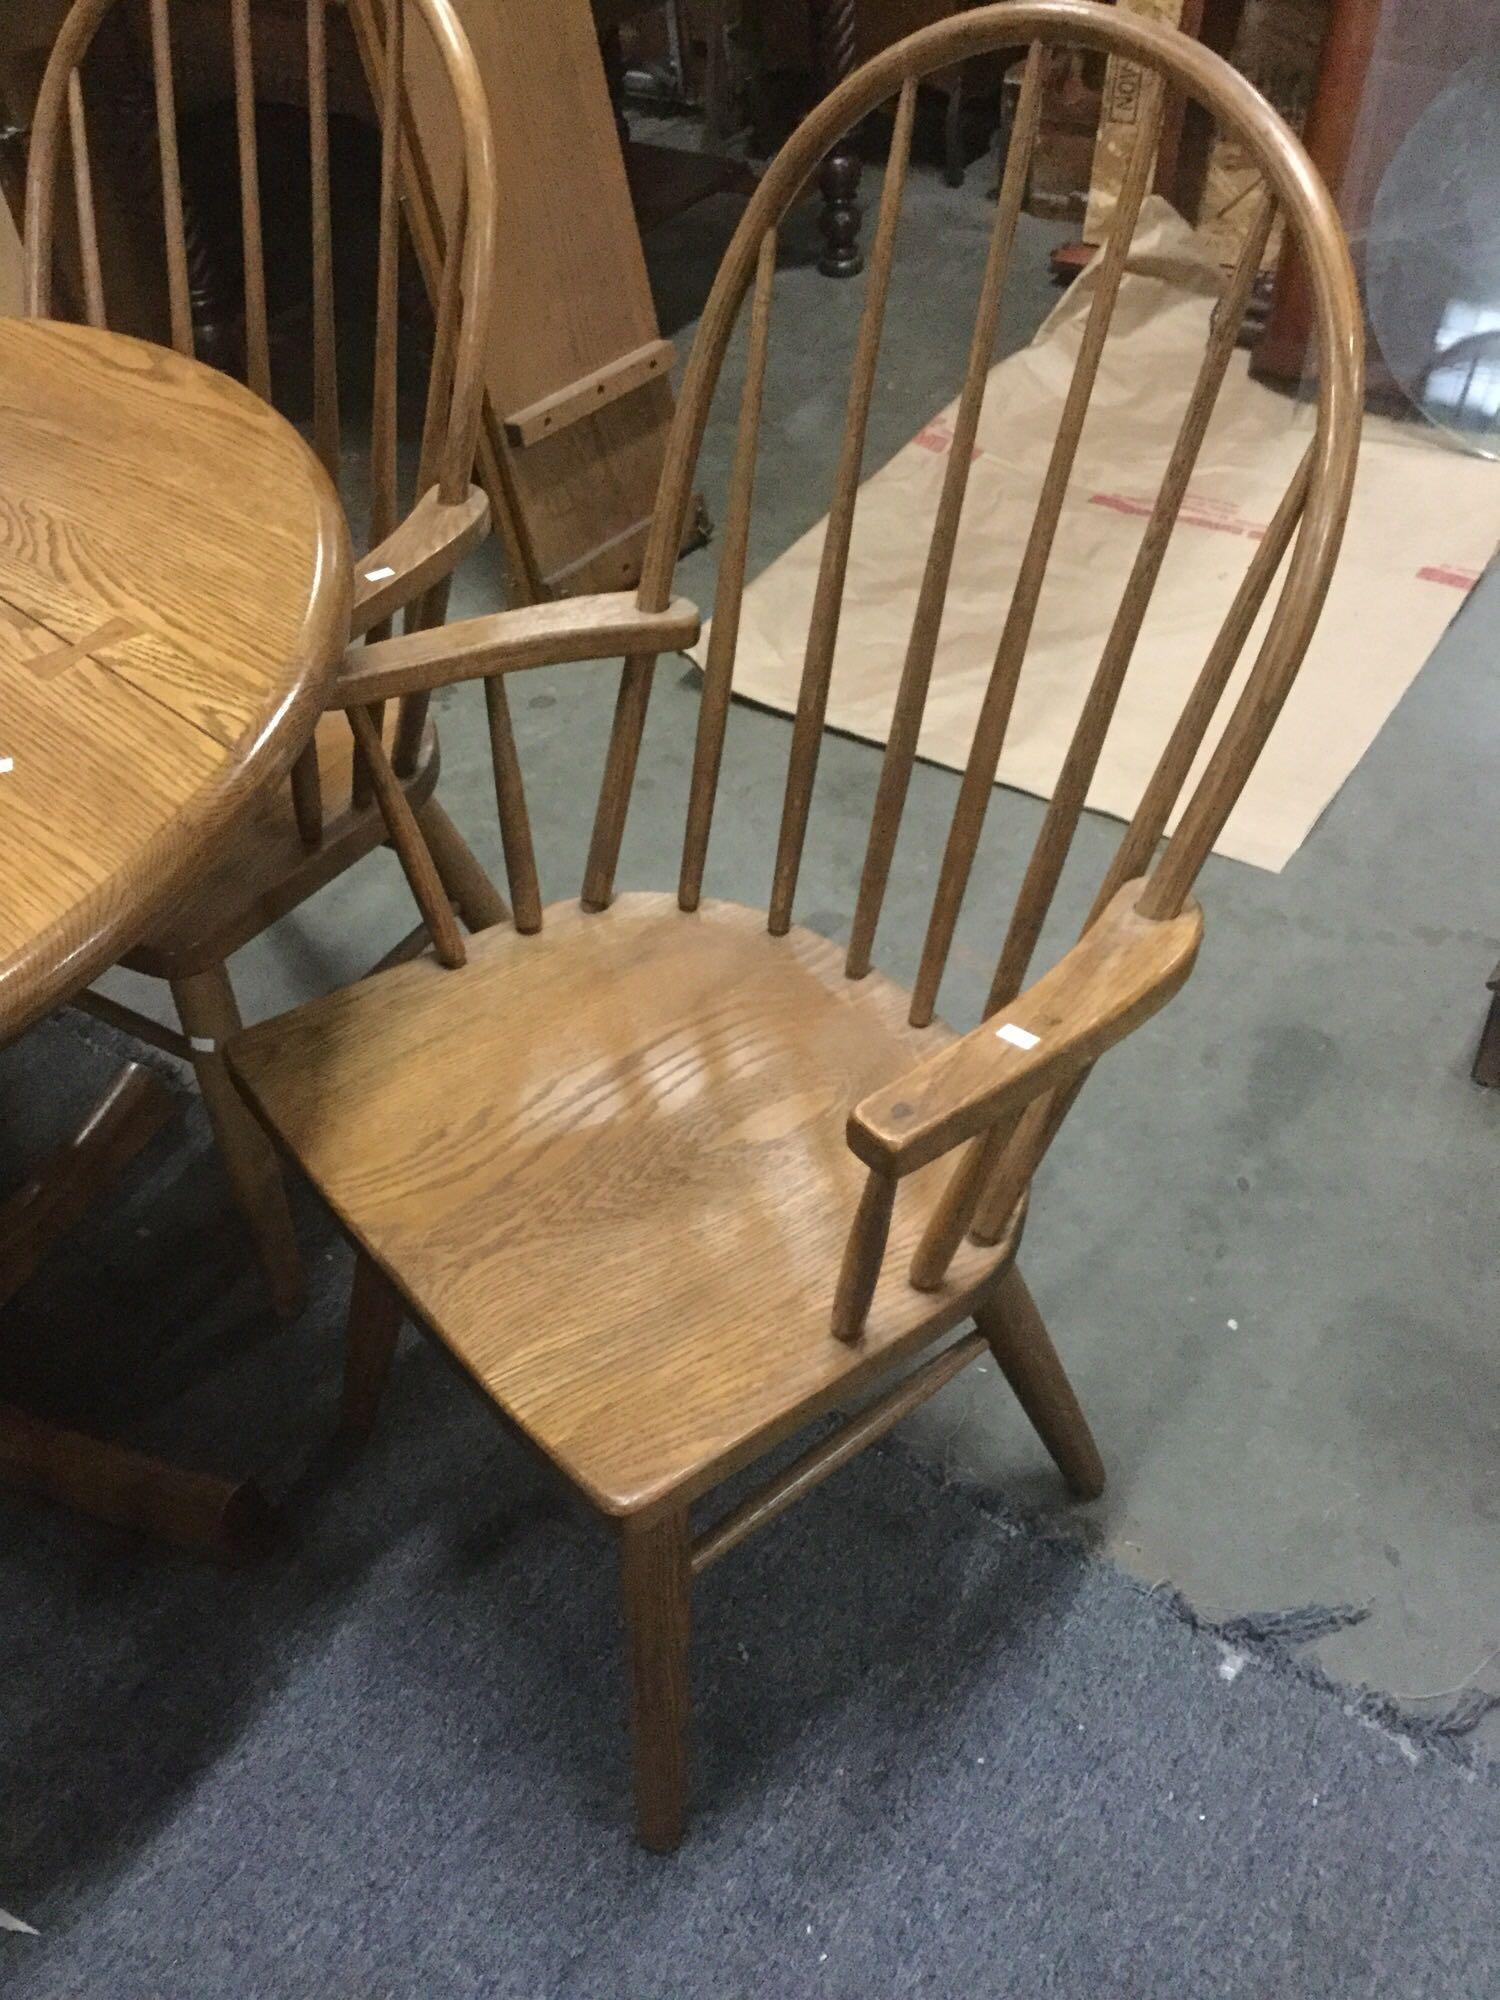 Vintage Conant Ball Furniture Co. round oak table with four chairs and two leaves. approx 44x44x30